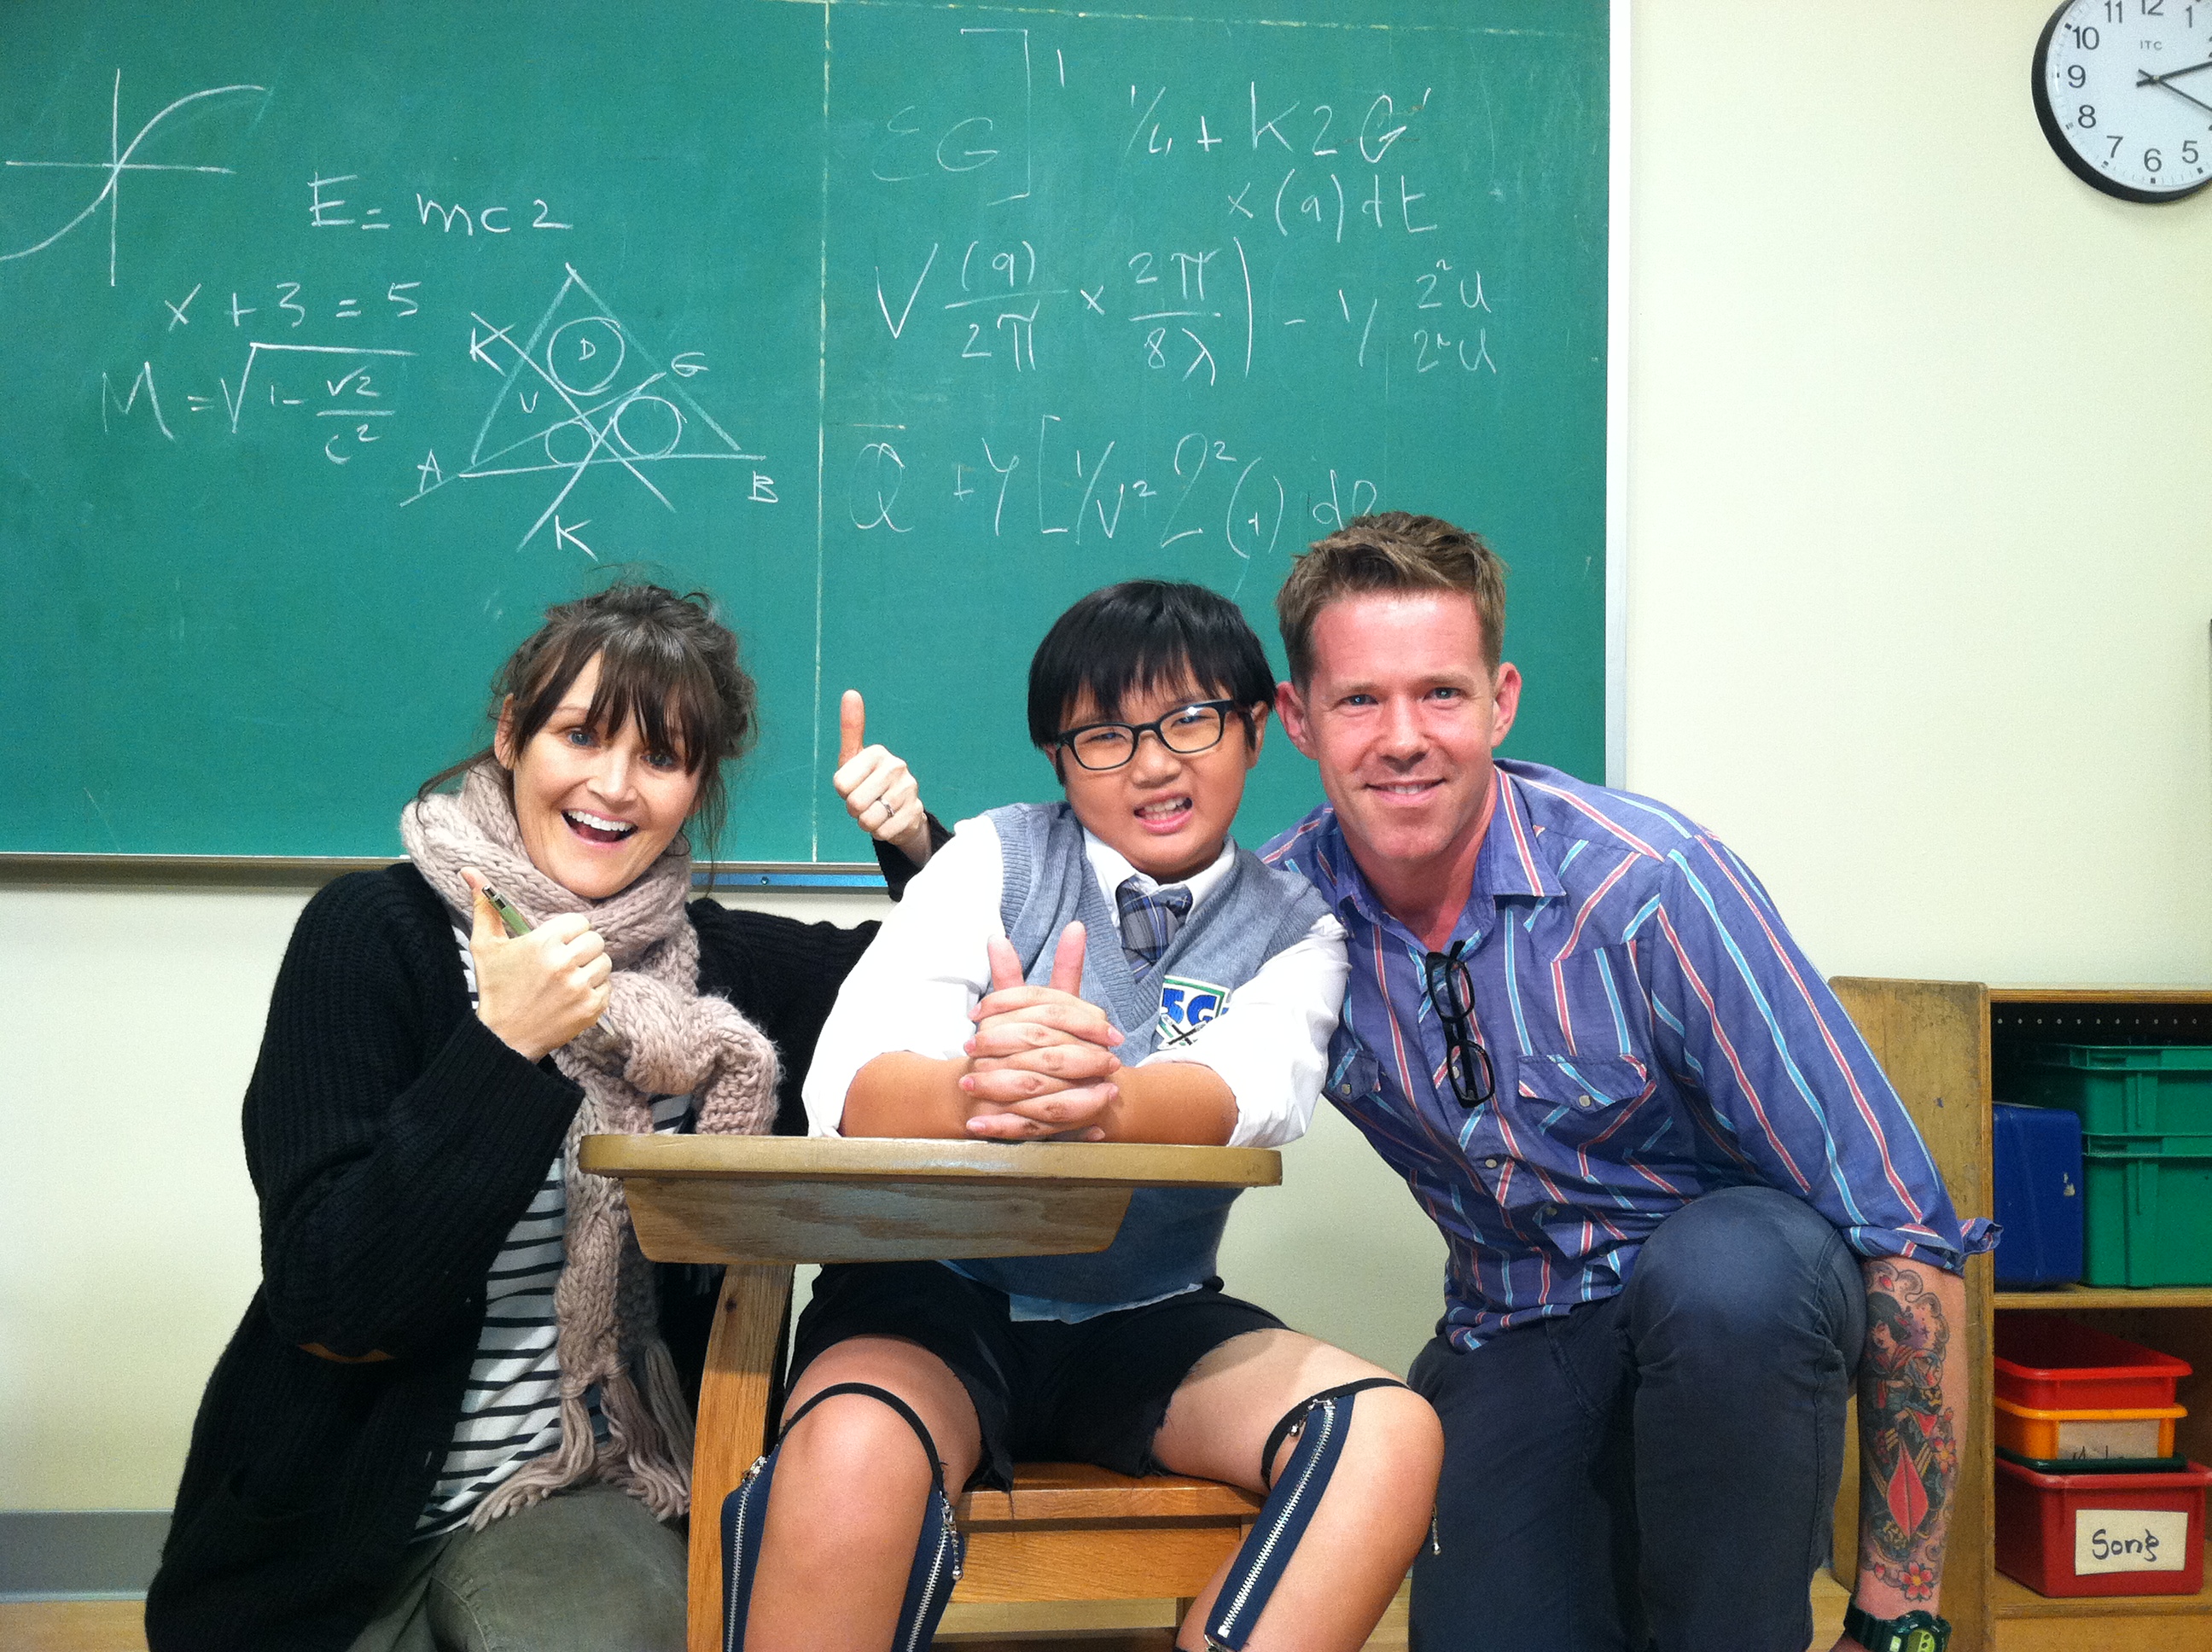 Matthew Zhang (Are you smarter than 5th grade Promo, 2012) with Director Melissa B-Klinger and Producer.